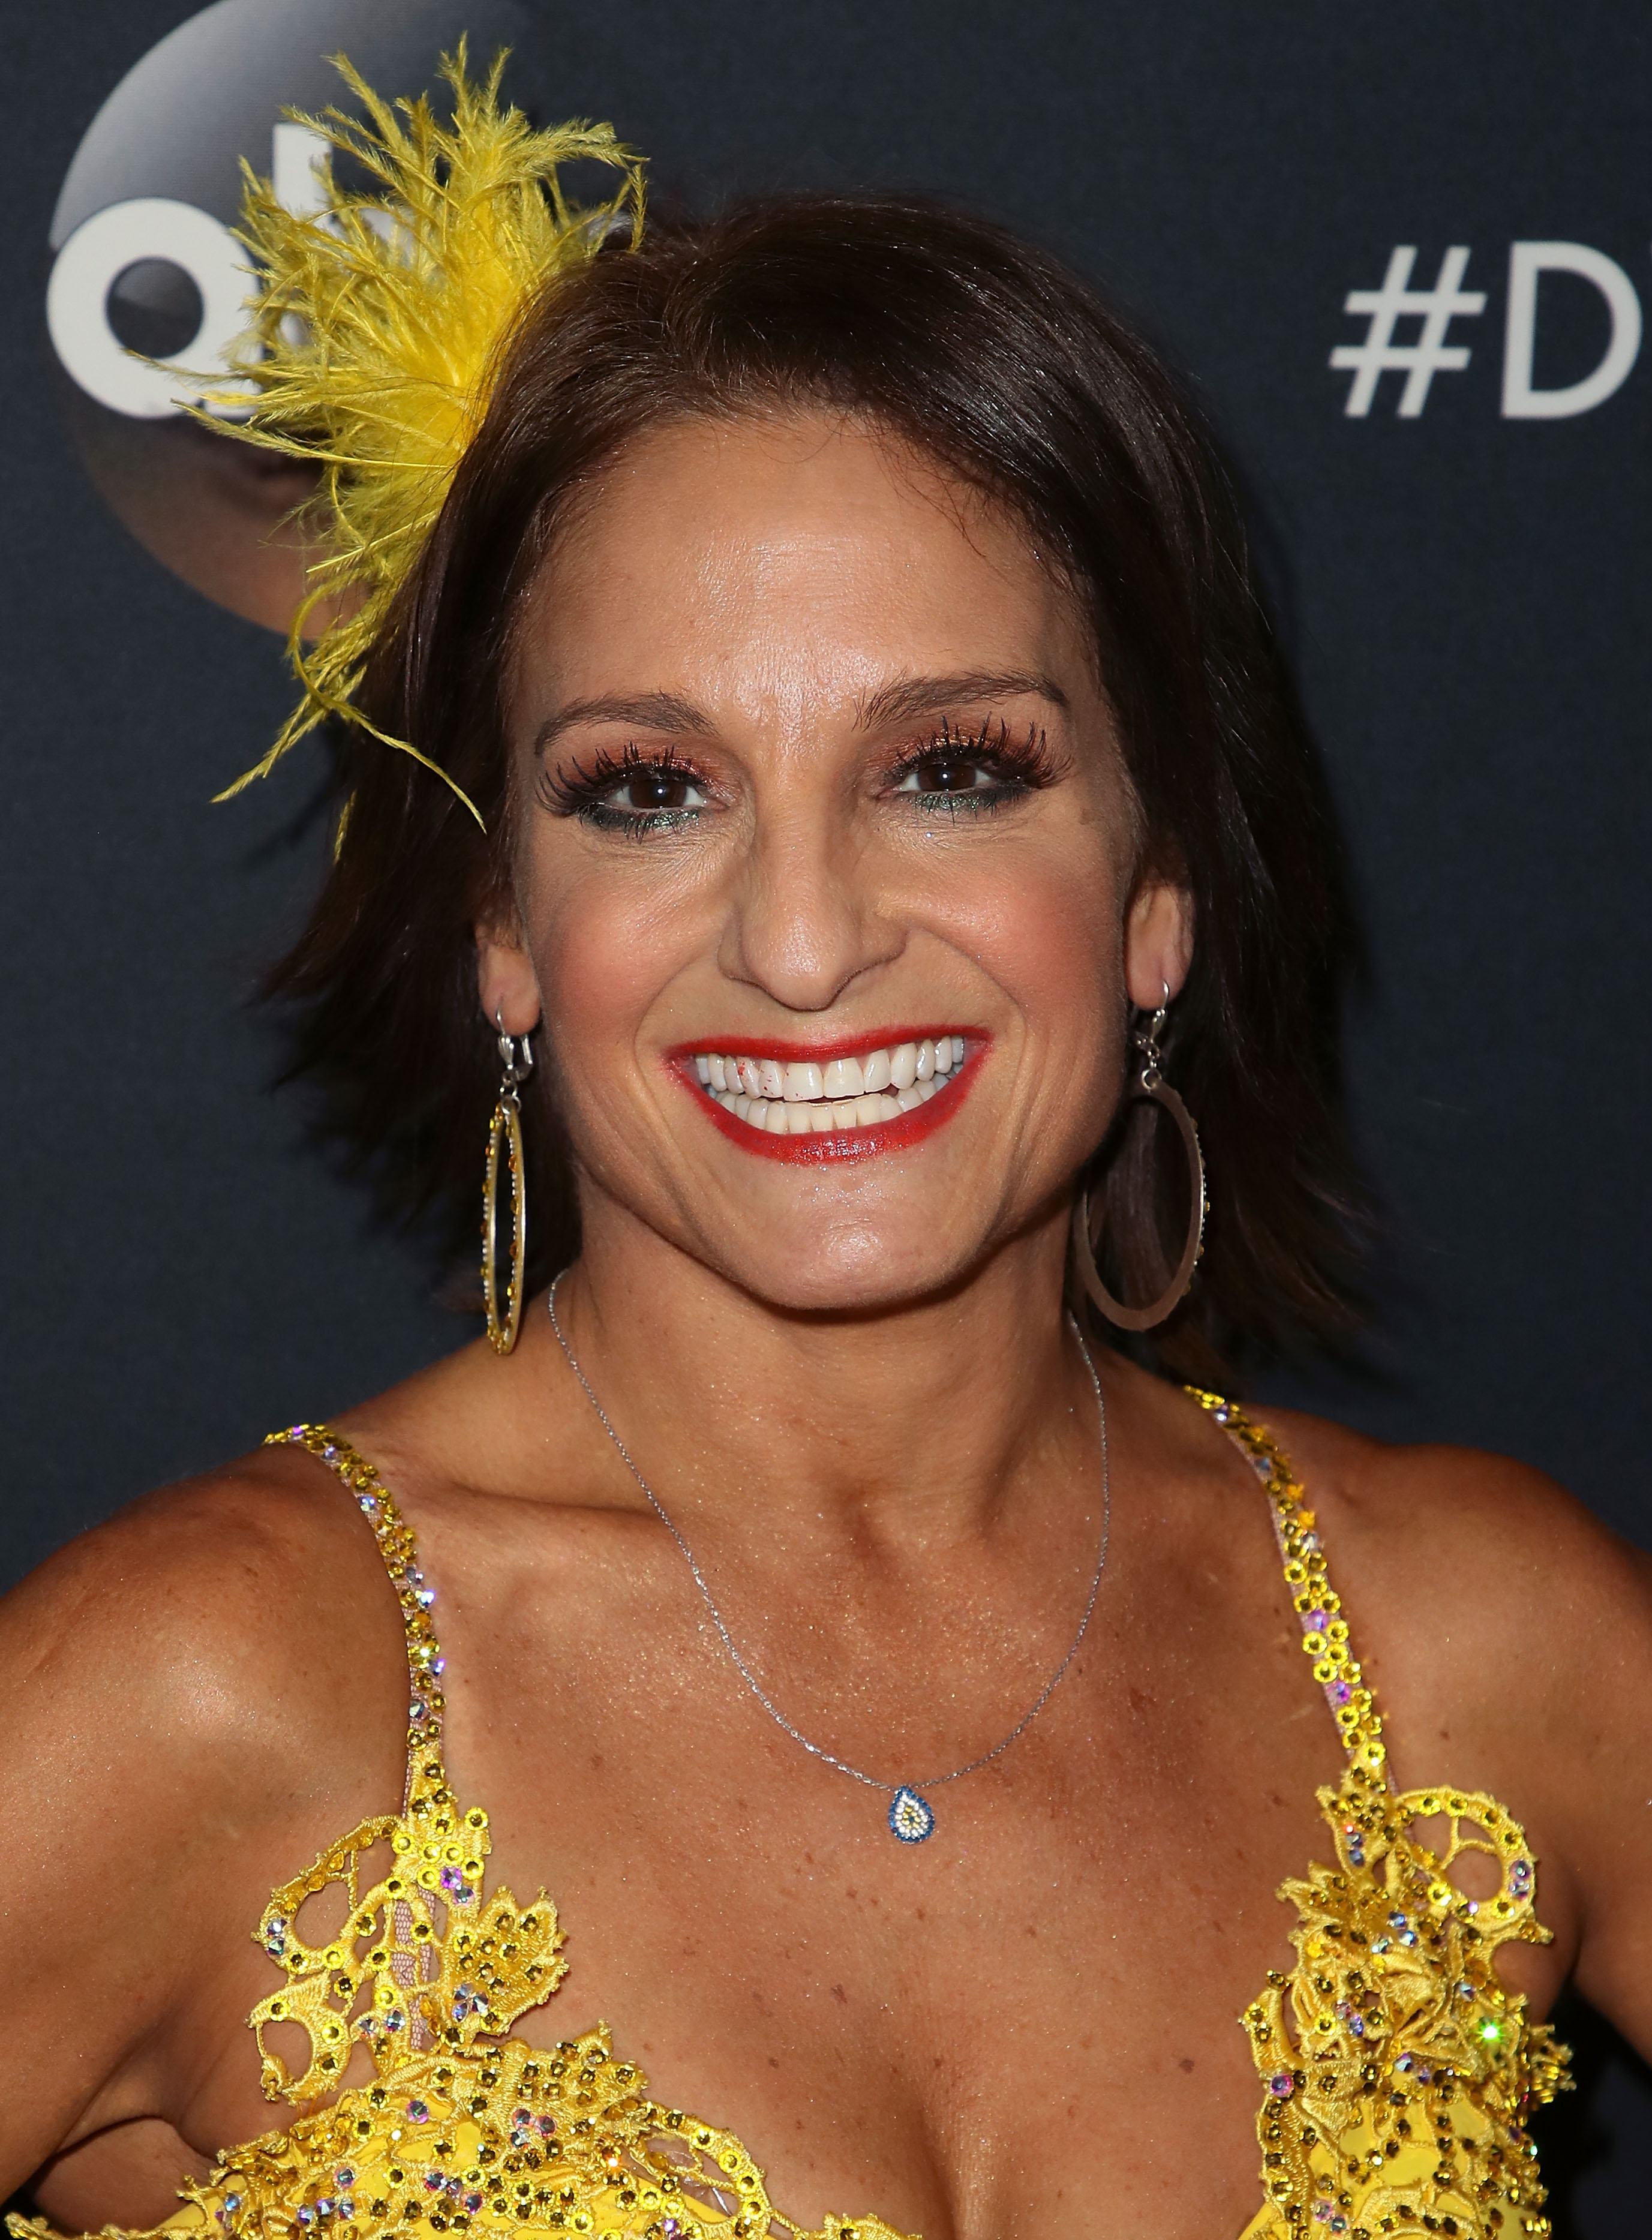 Mary Lou Retton poses at "Dancing with the Stars" Season 27 at CBS Televison City on October 2, 2018, in Los Angeles, California. | Source: Getty Images